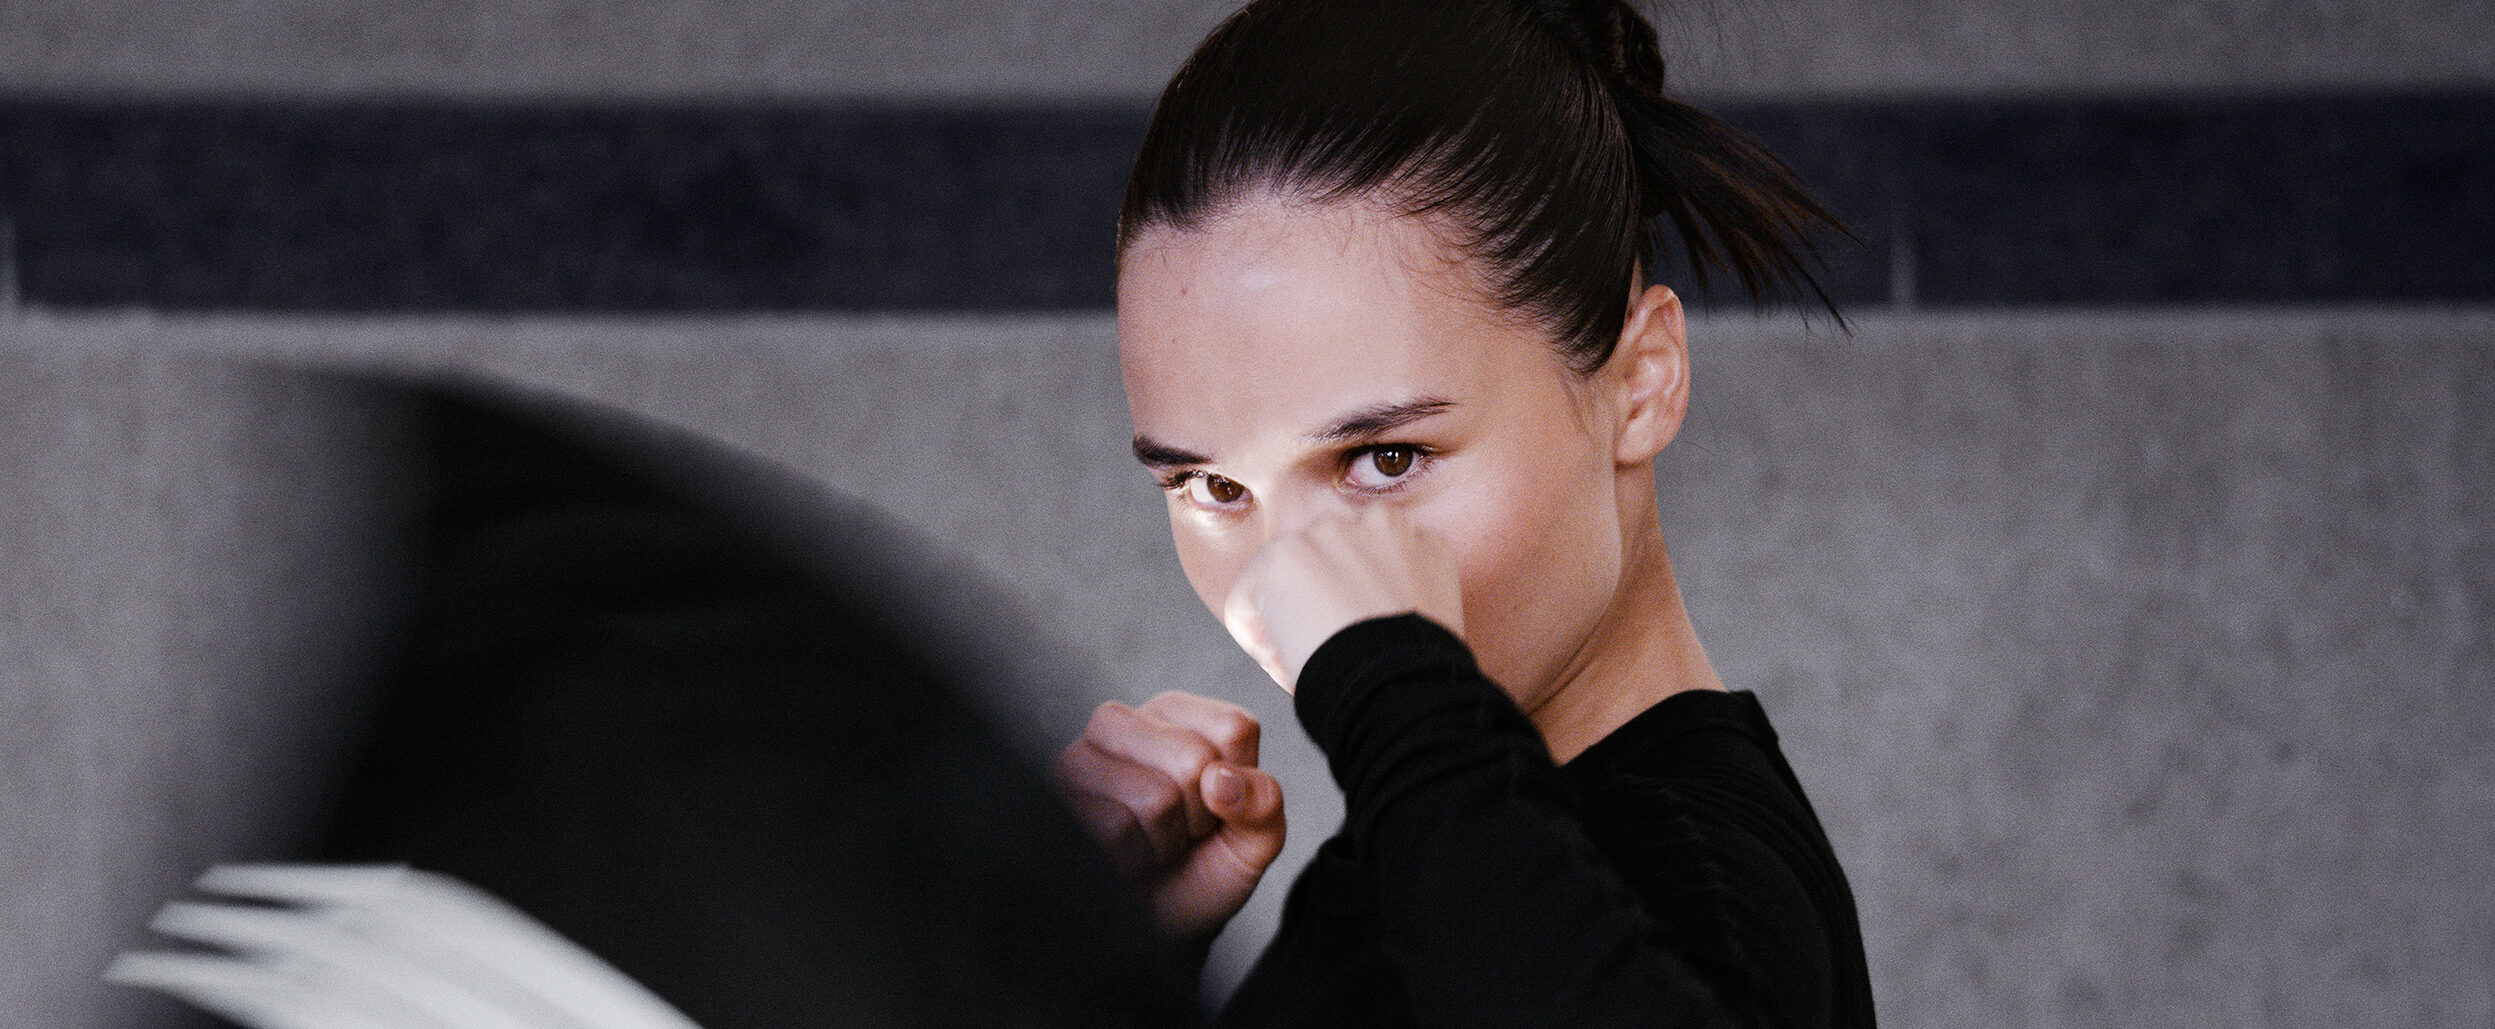 An intense female boxer trains in a black Y-3 sports top with white stripes, her focused gaze directed towards the camera as she throws a punch.